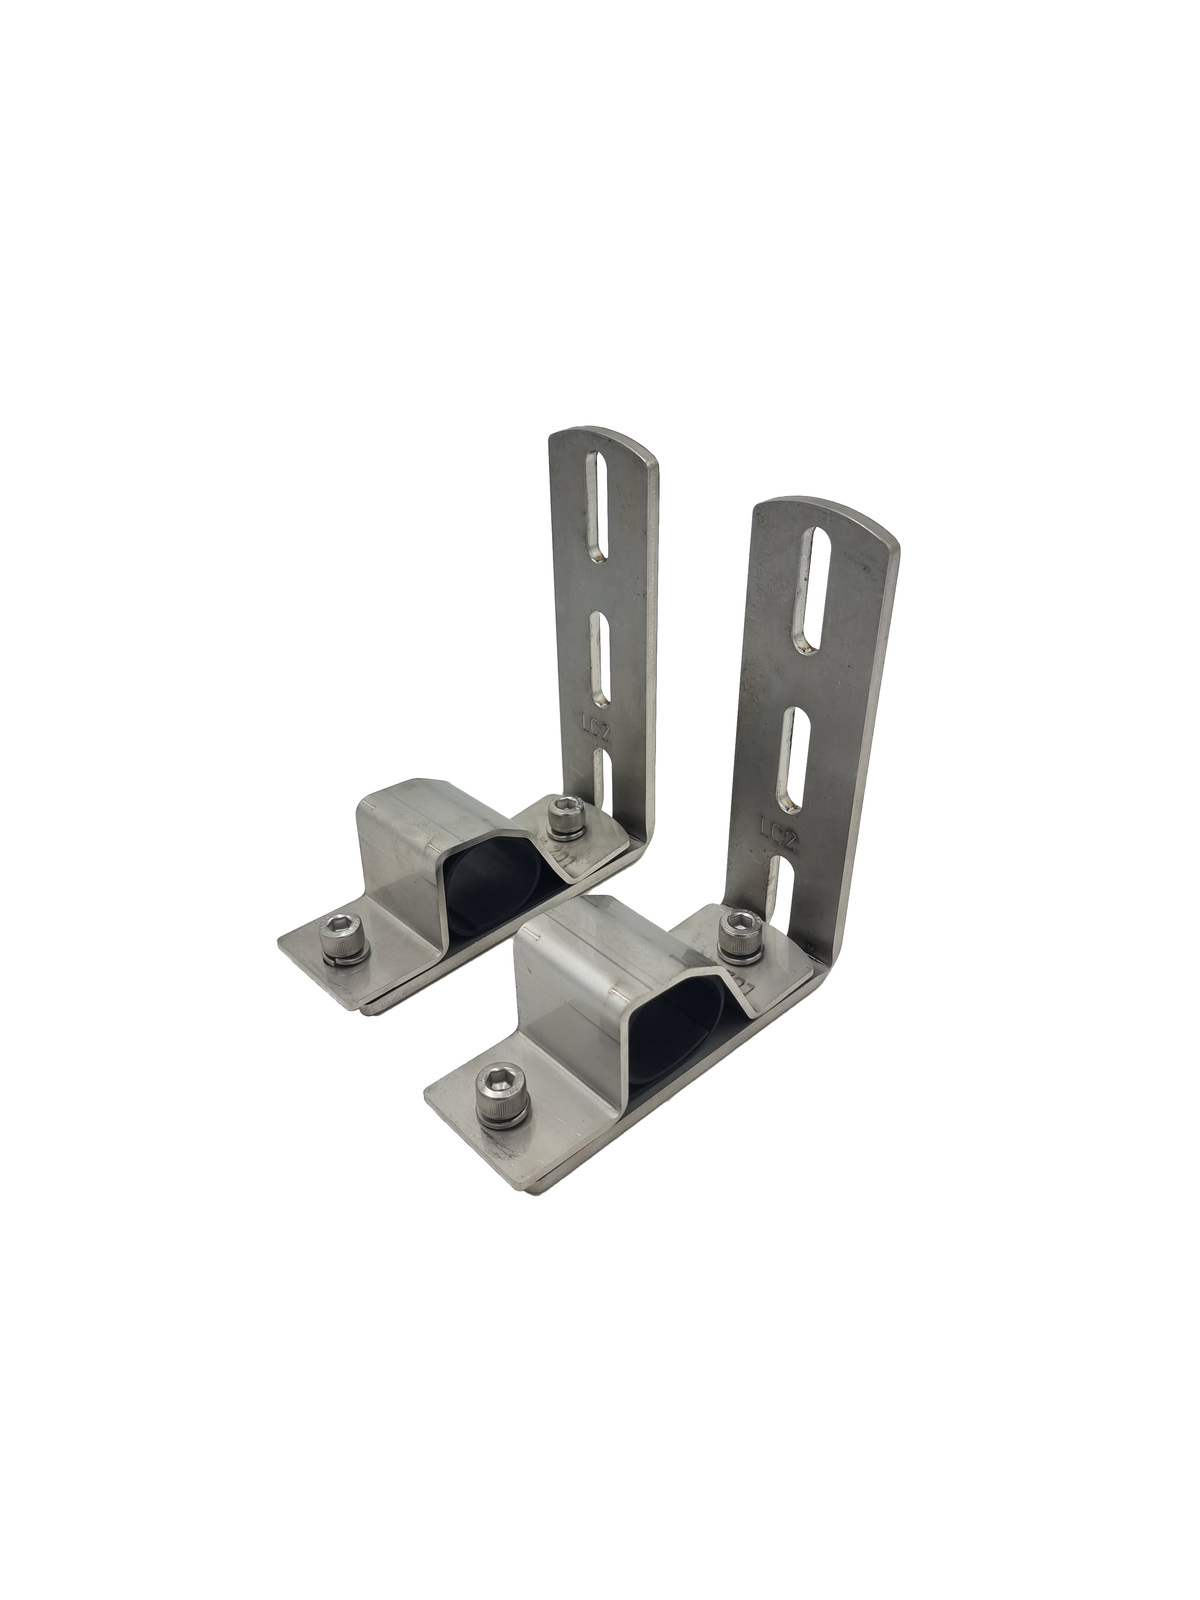 GMF 4X4 ROOF RAIL AWNING BRACKETS (PAIR) TO SUIT TOYOTA LAND CRUISER 200 SERIES (2016-ON)